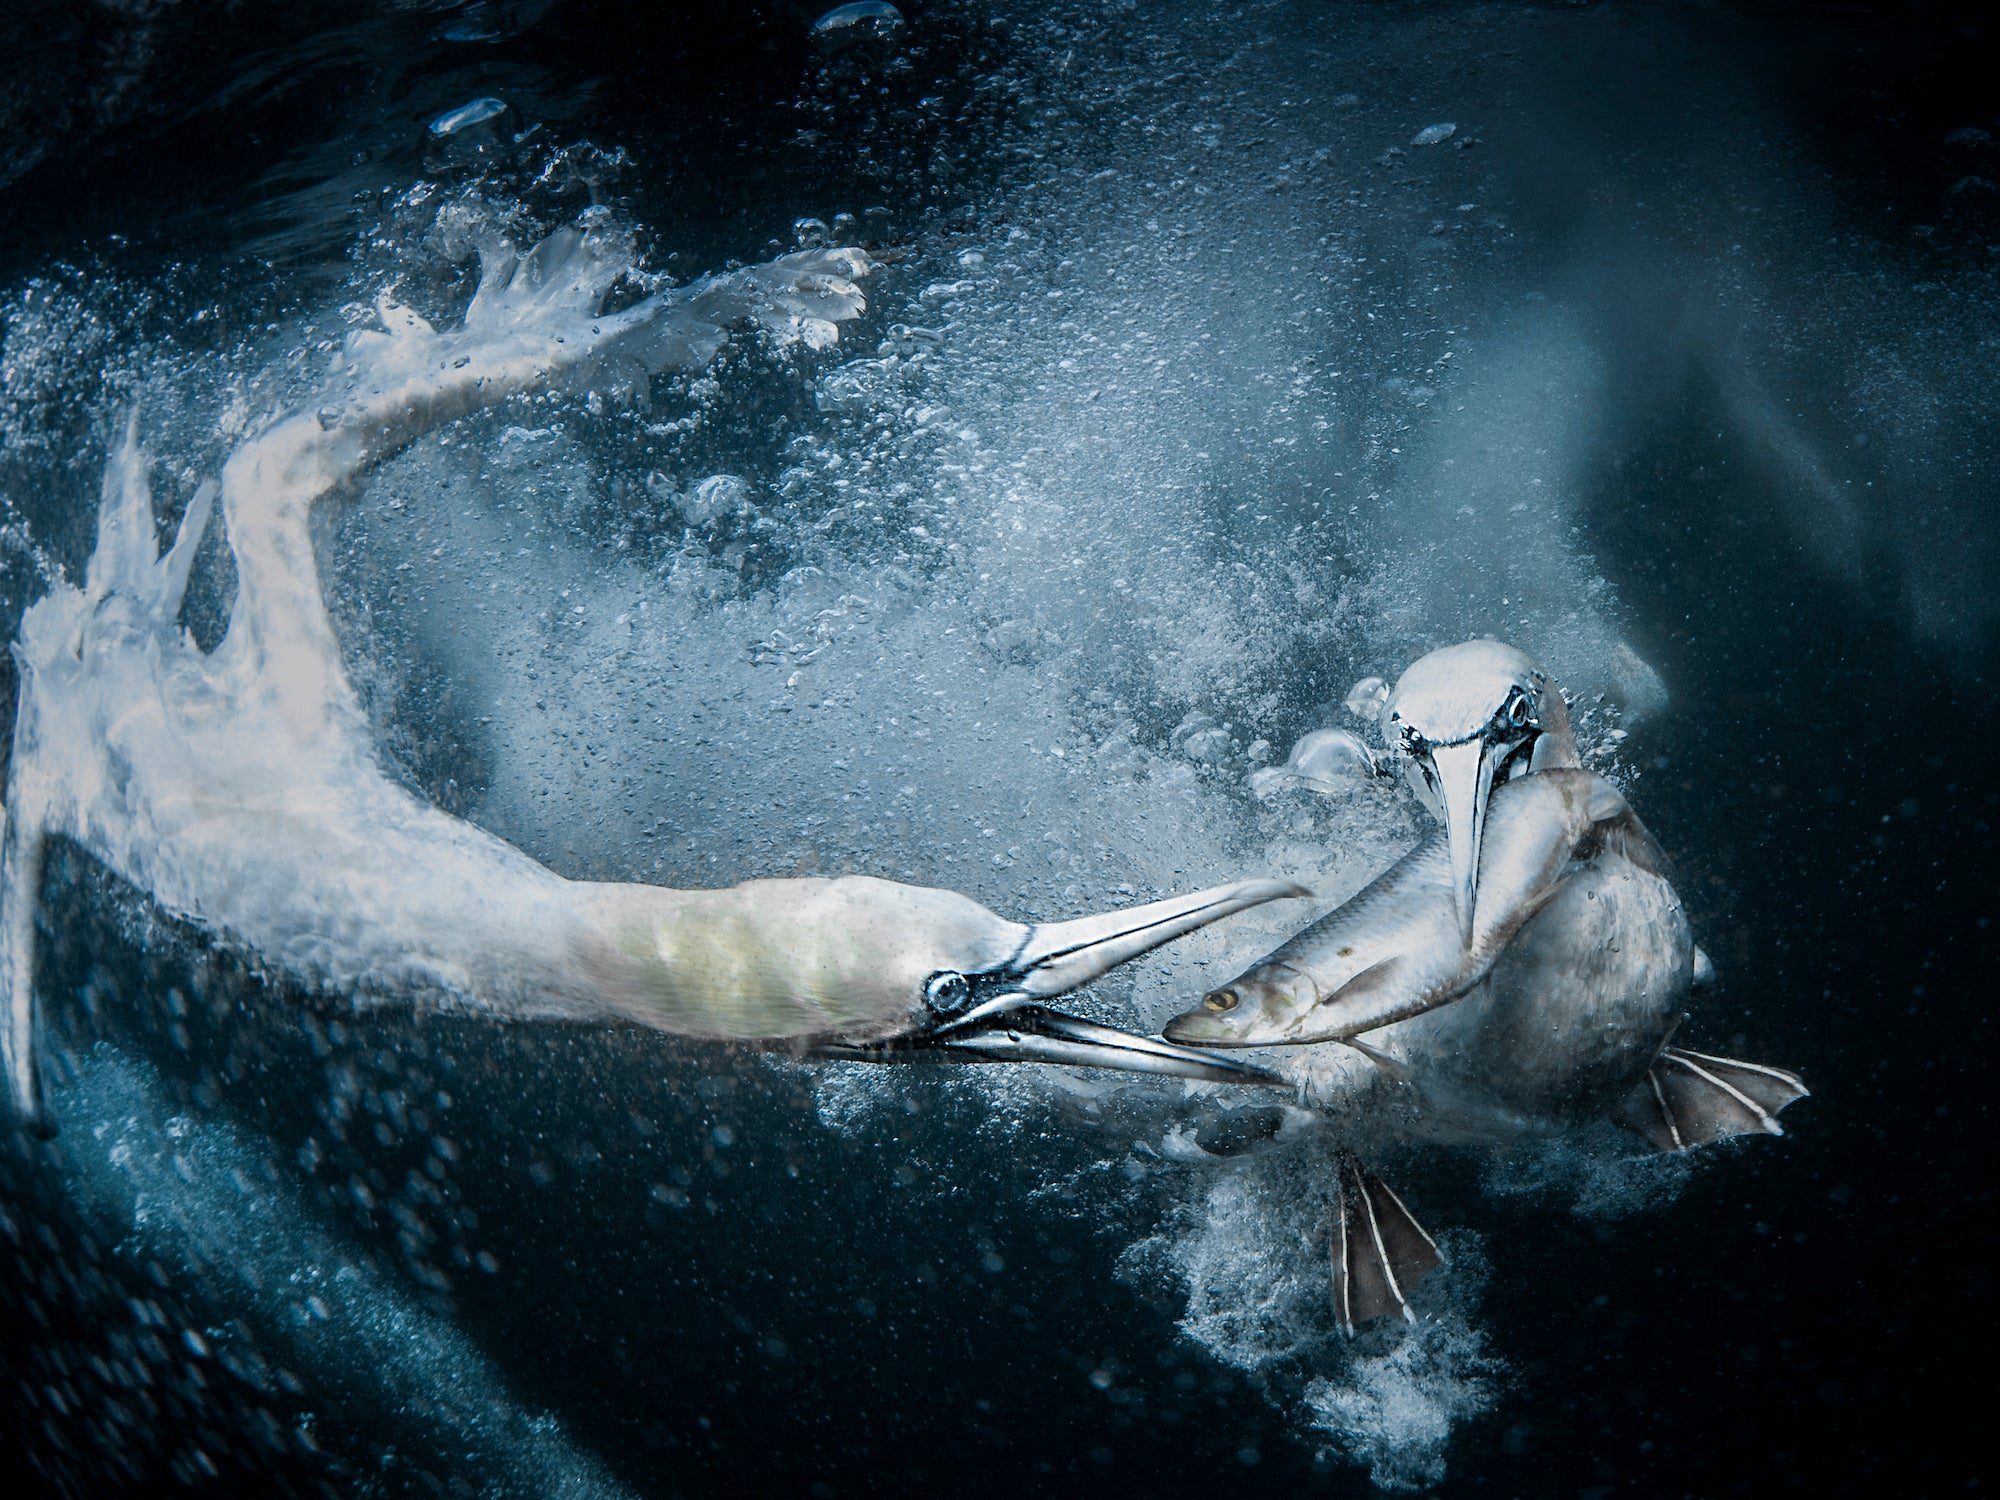 Two gannets under the water fighting for a fish